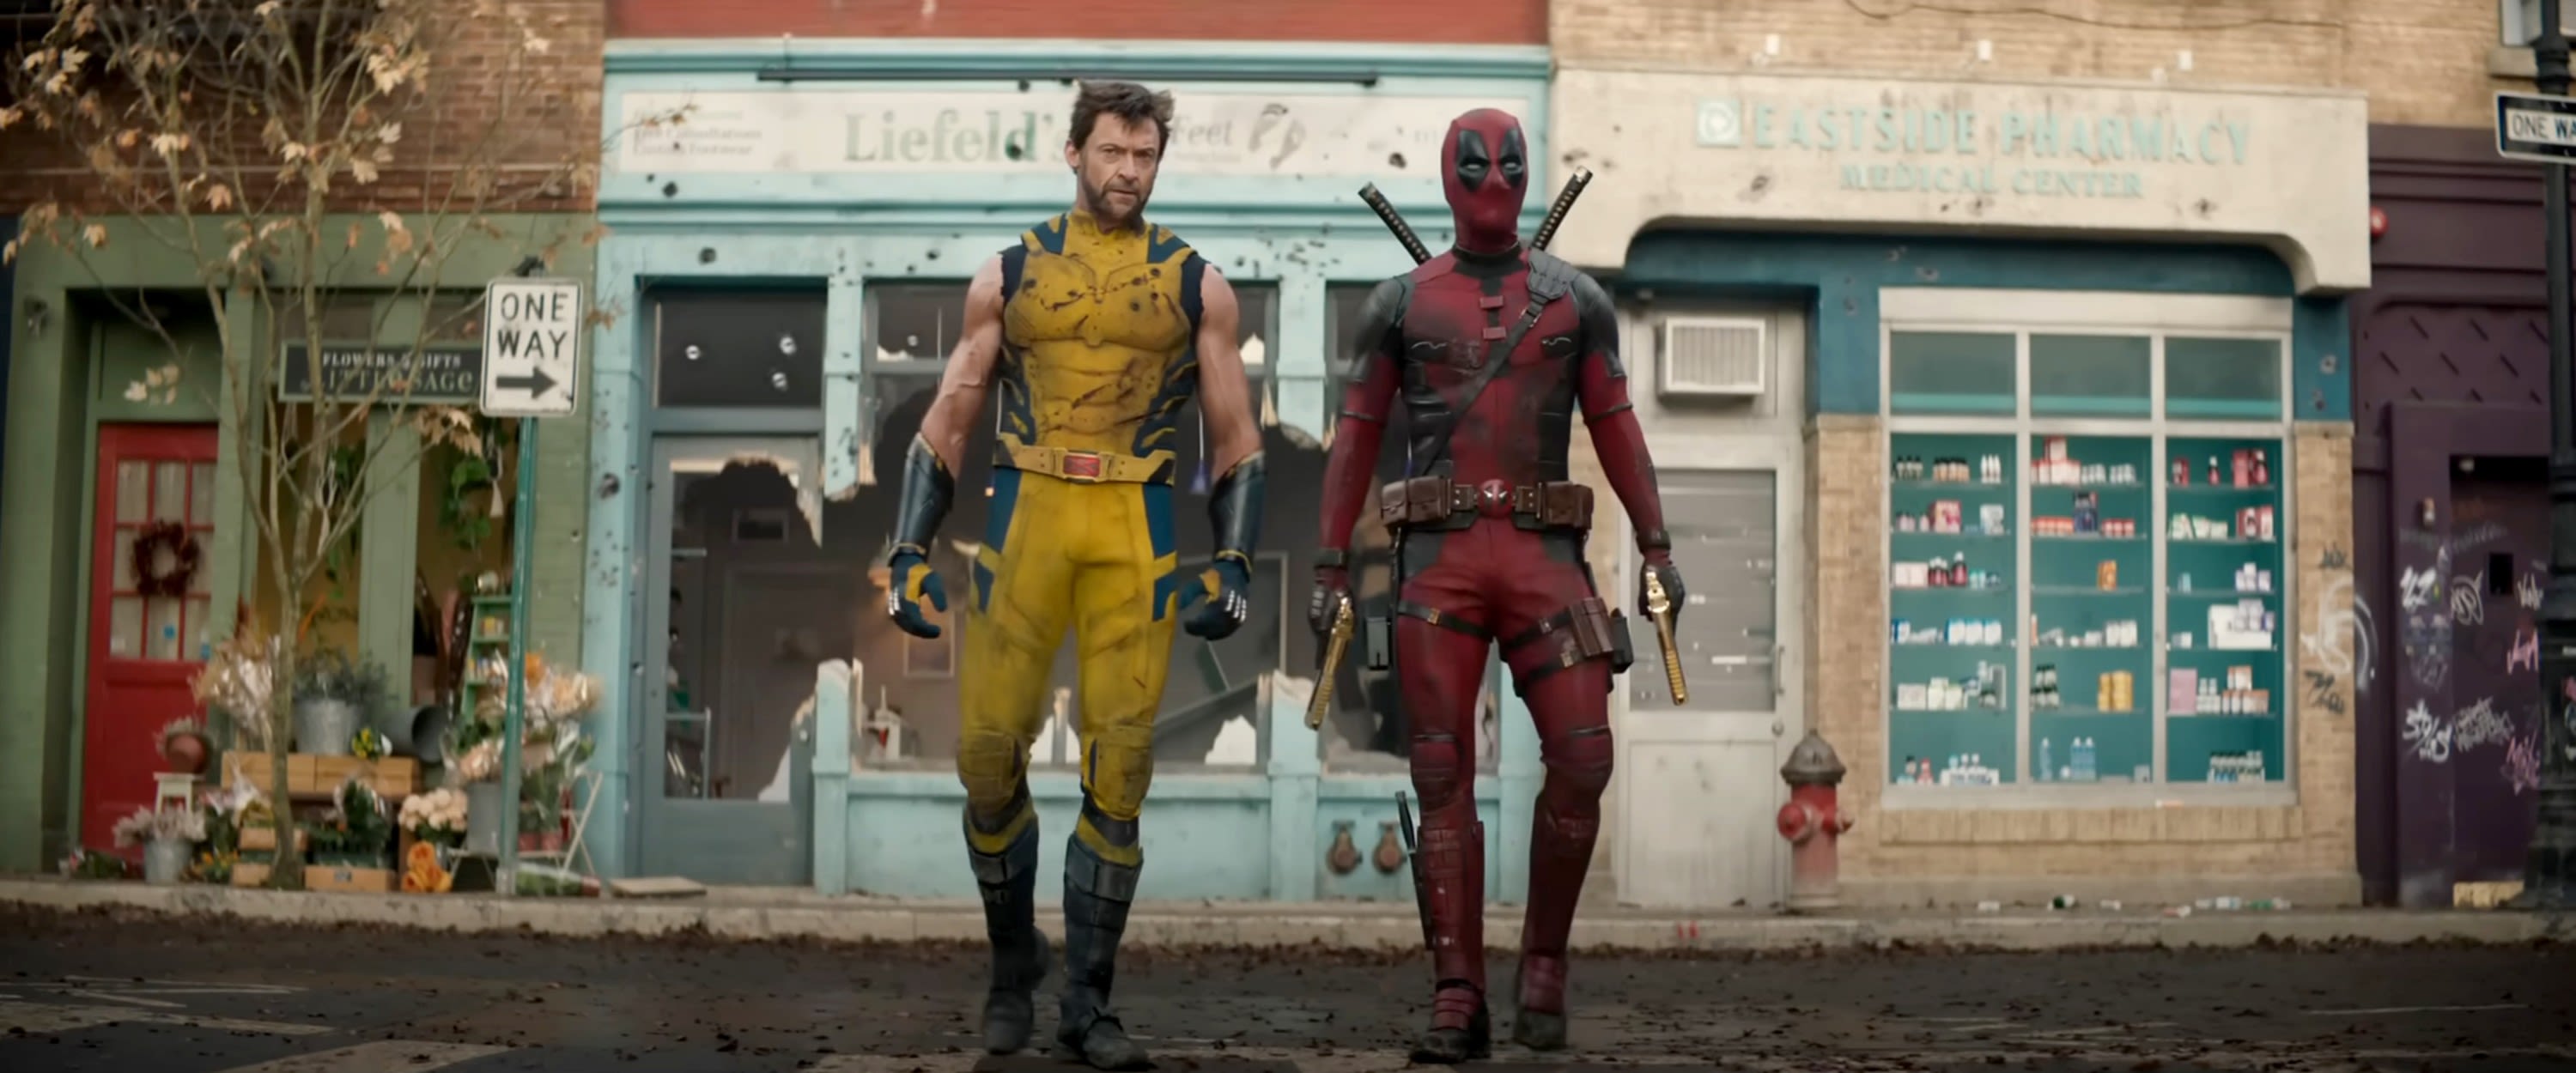 The It List: 'Deadpool & Wolverine' take Marvel to new heights, the Olympics opening ceremony lights up Paris, 'The Fabulous Four' friendships will warm your heart